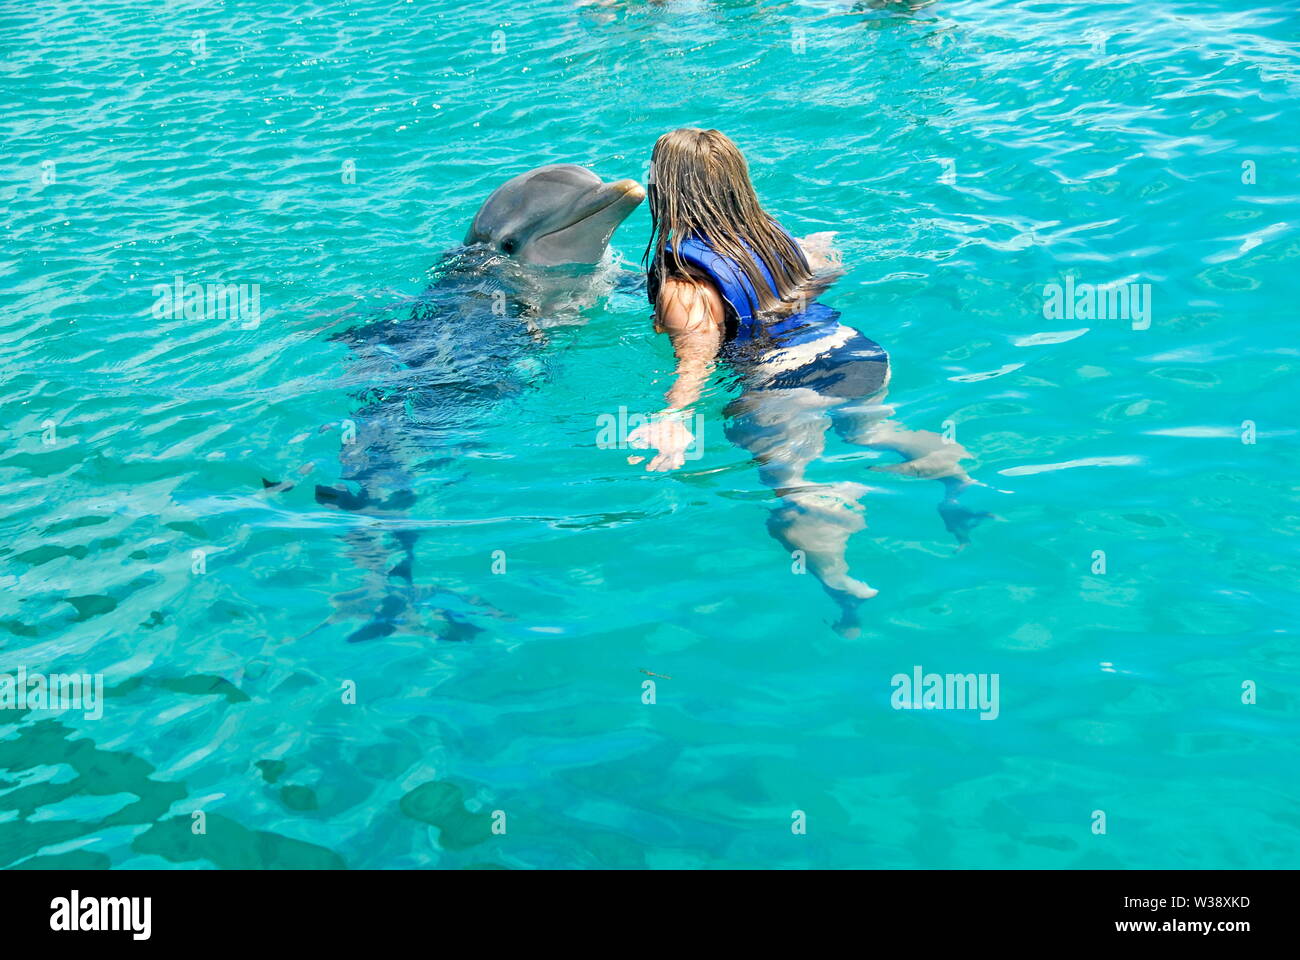 Swimming with the dolphins at Blue Lagoon Island near Nassau, Bahamas, a shore excursion from Disney Dream cruise ship. Stock Photo